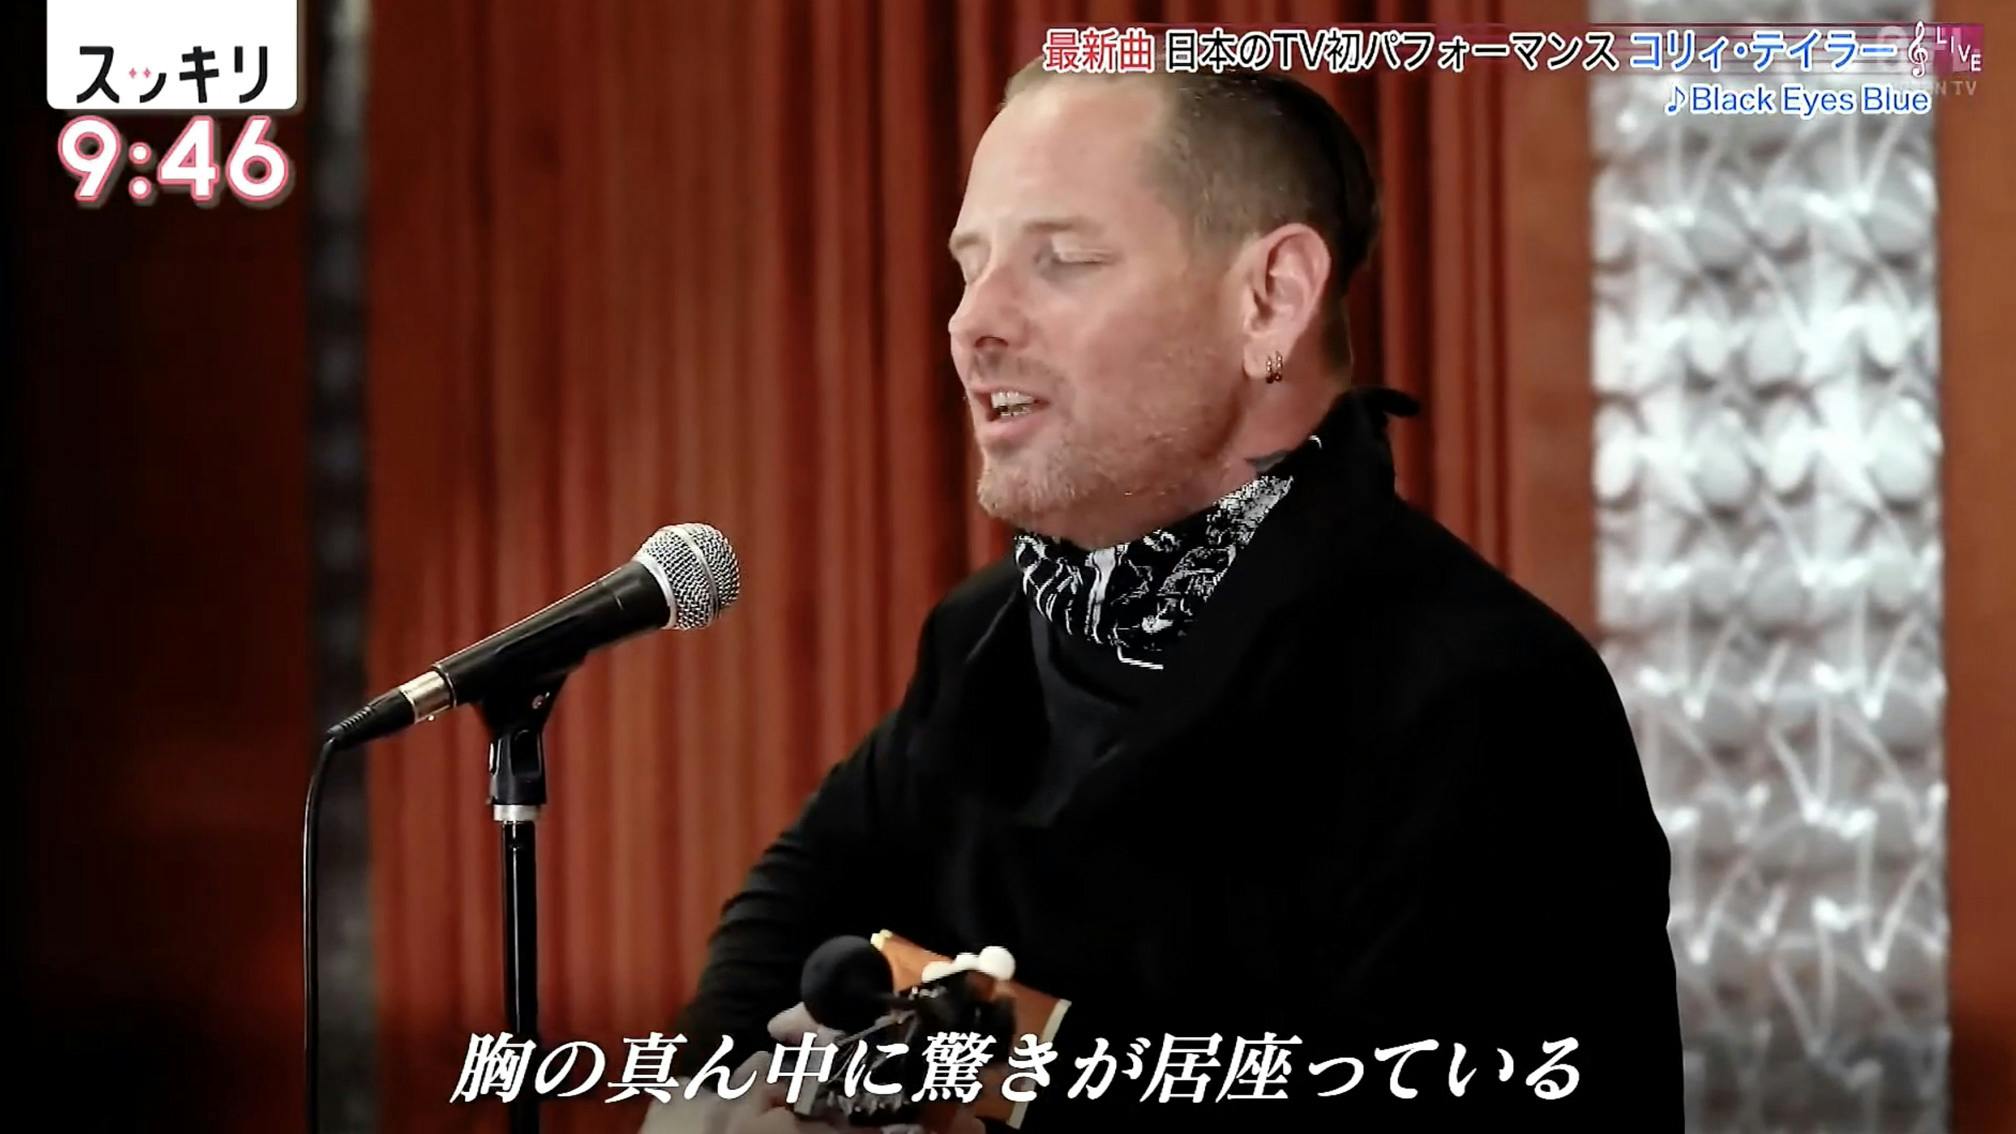 Watch Corey Taylor Perform Black Eyes Blue Live For The First Time